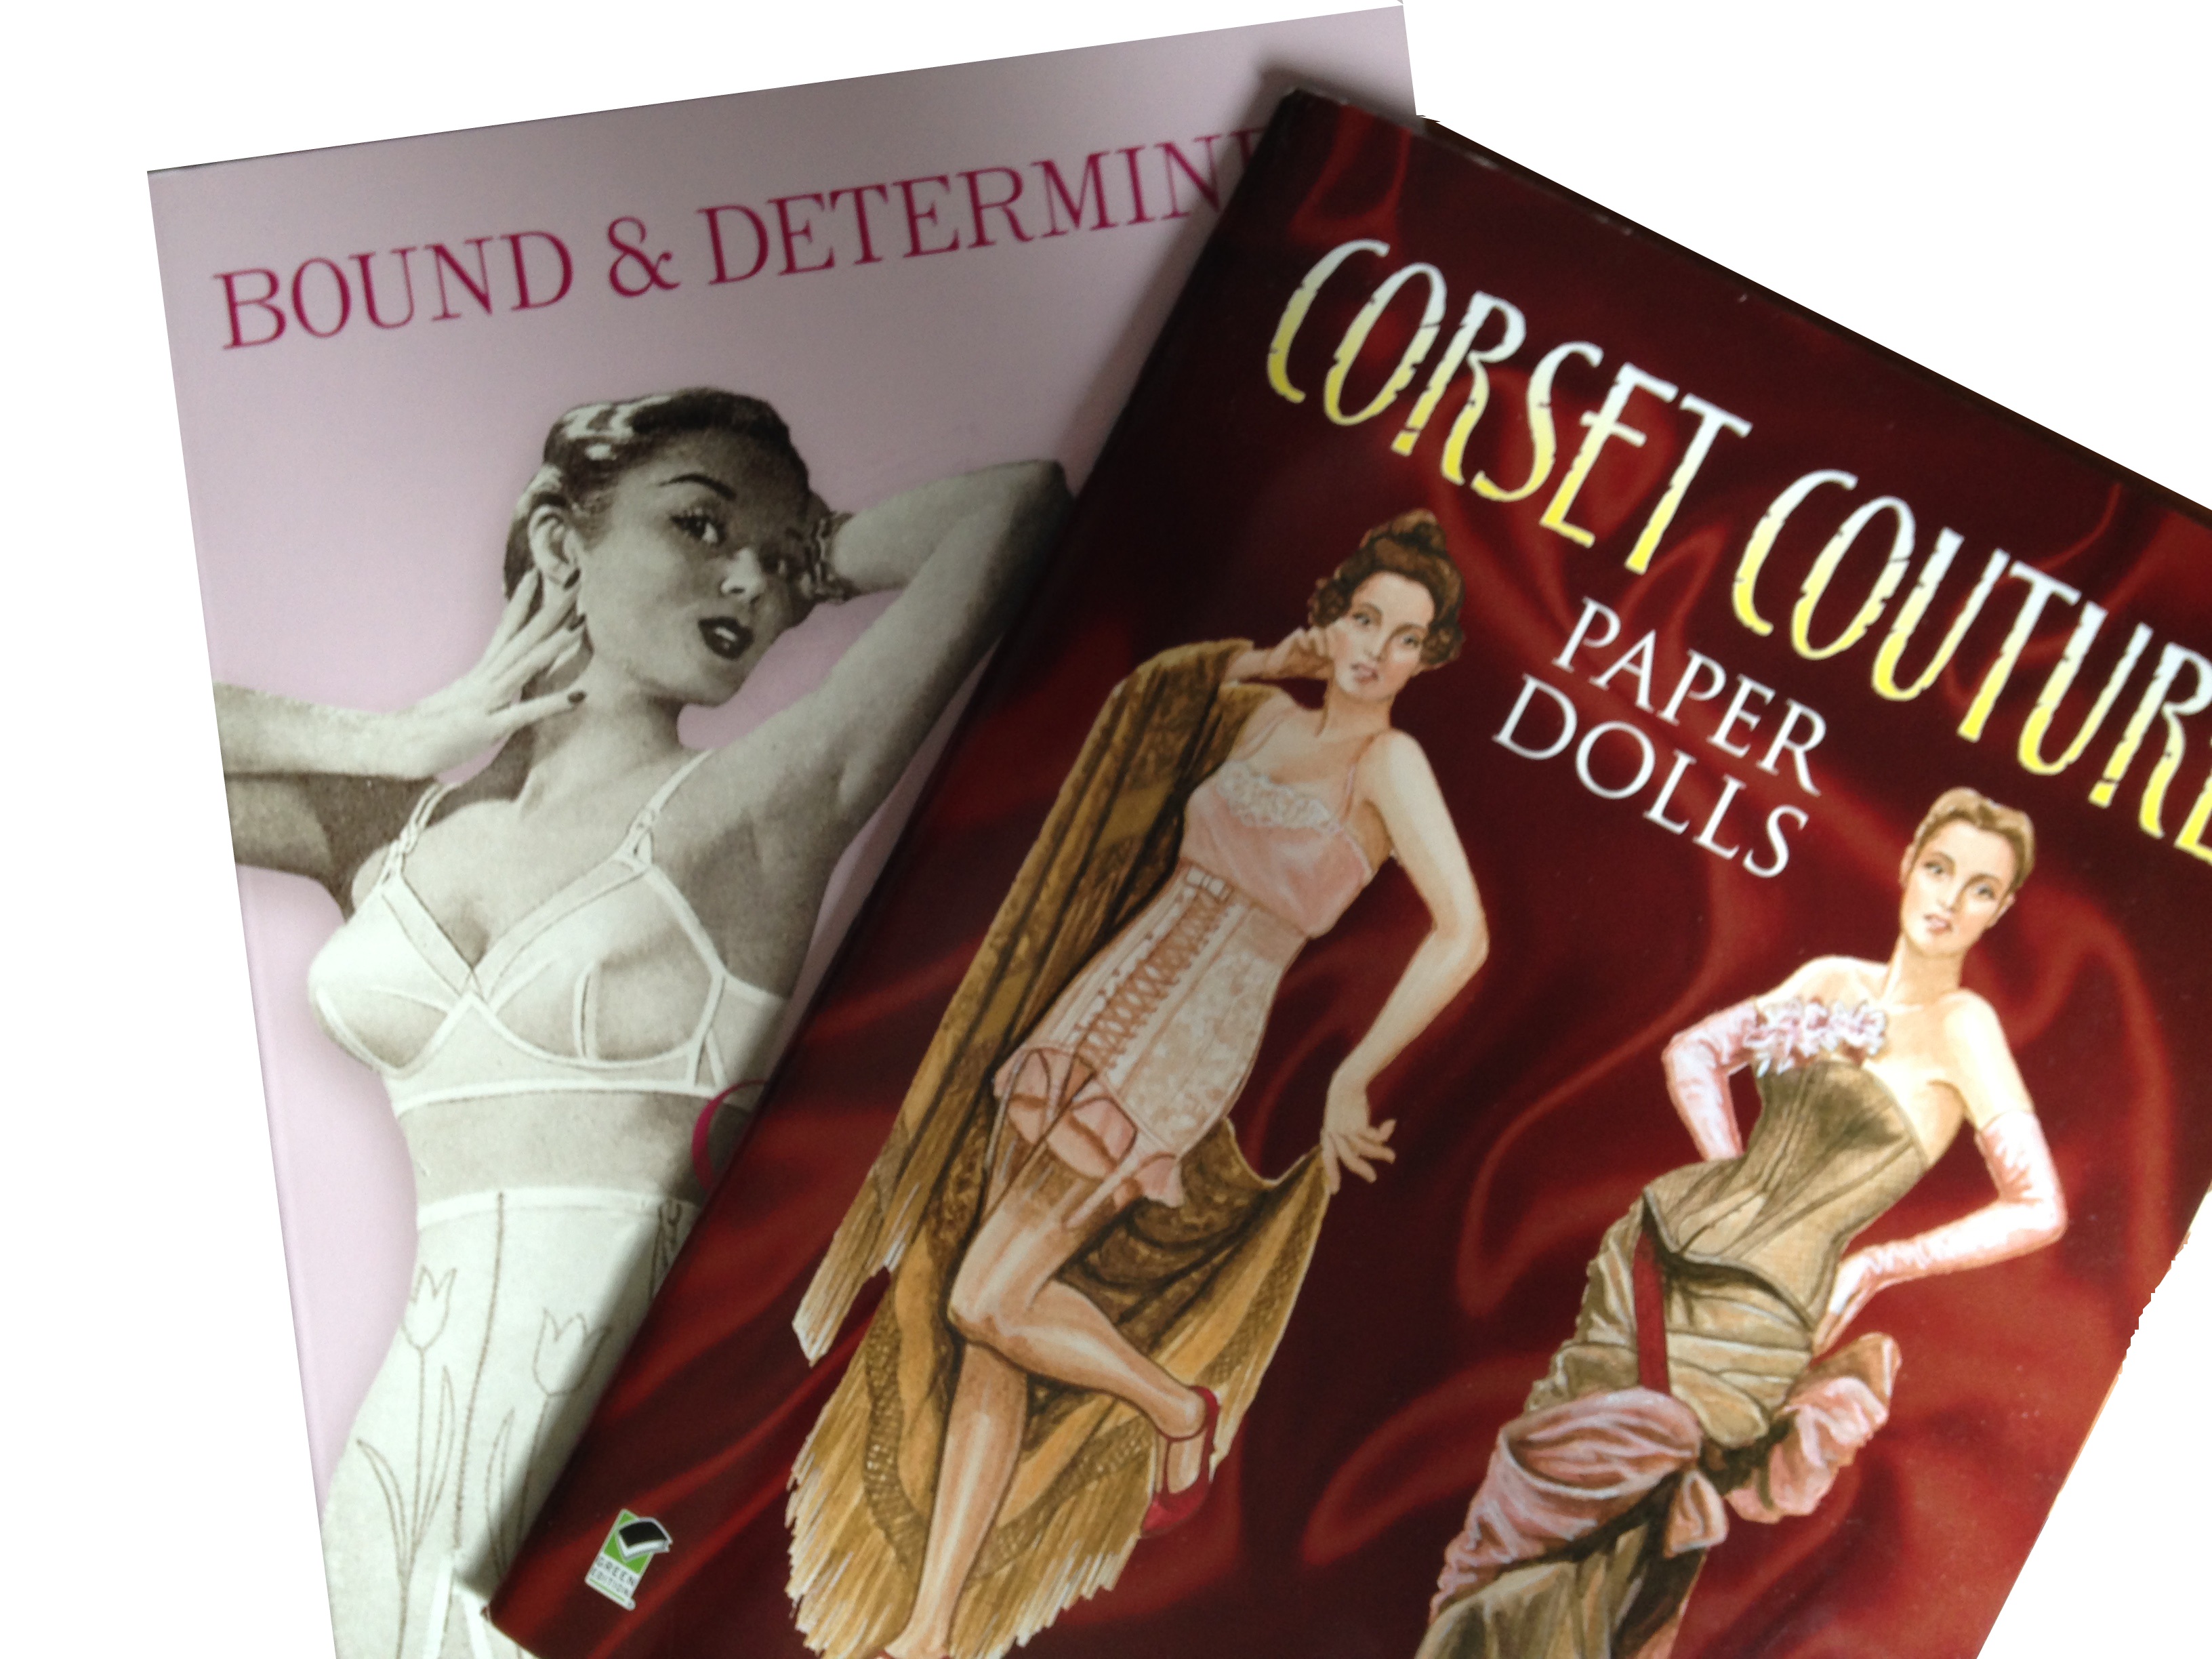 Bound & Determined: A Visual History of Corsets, 1850-1960 (Dover